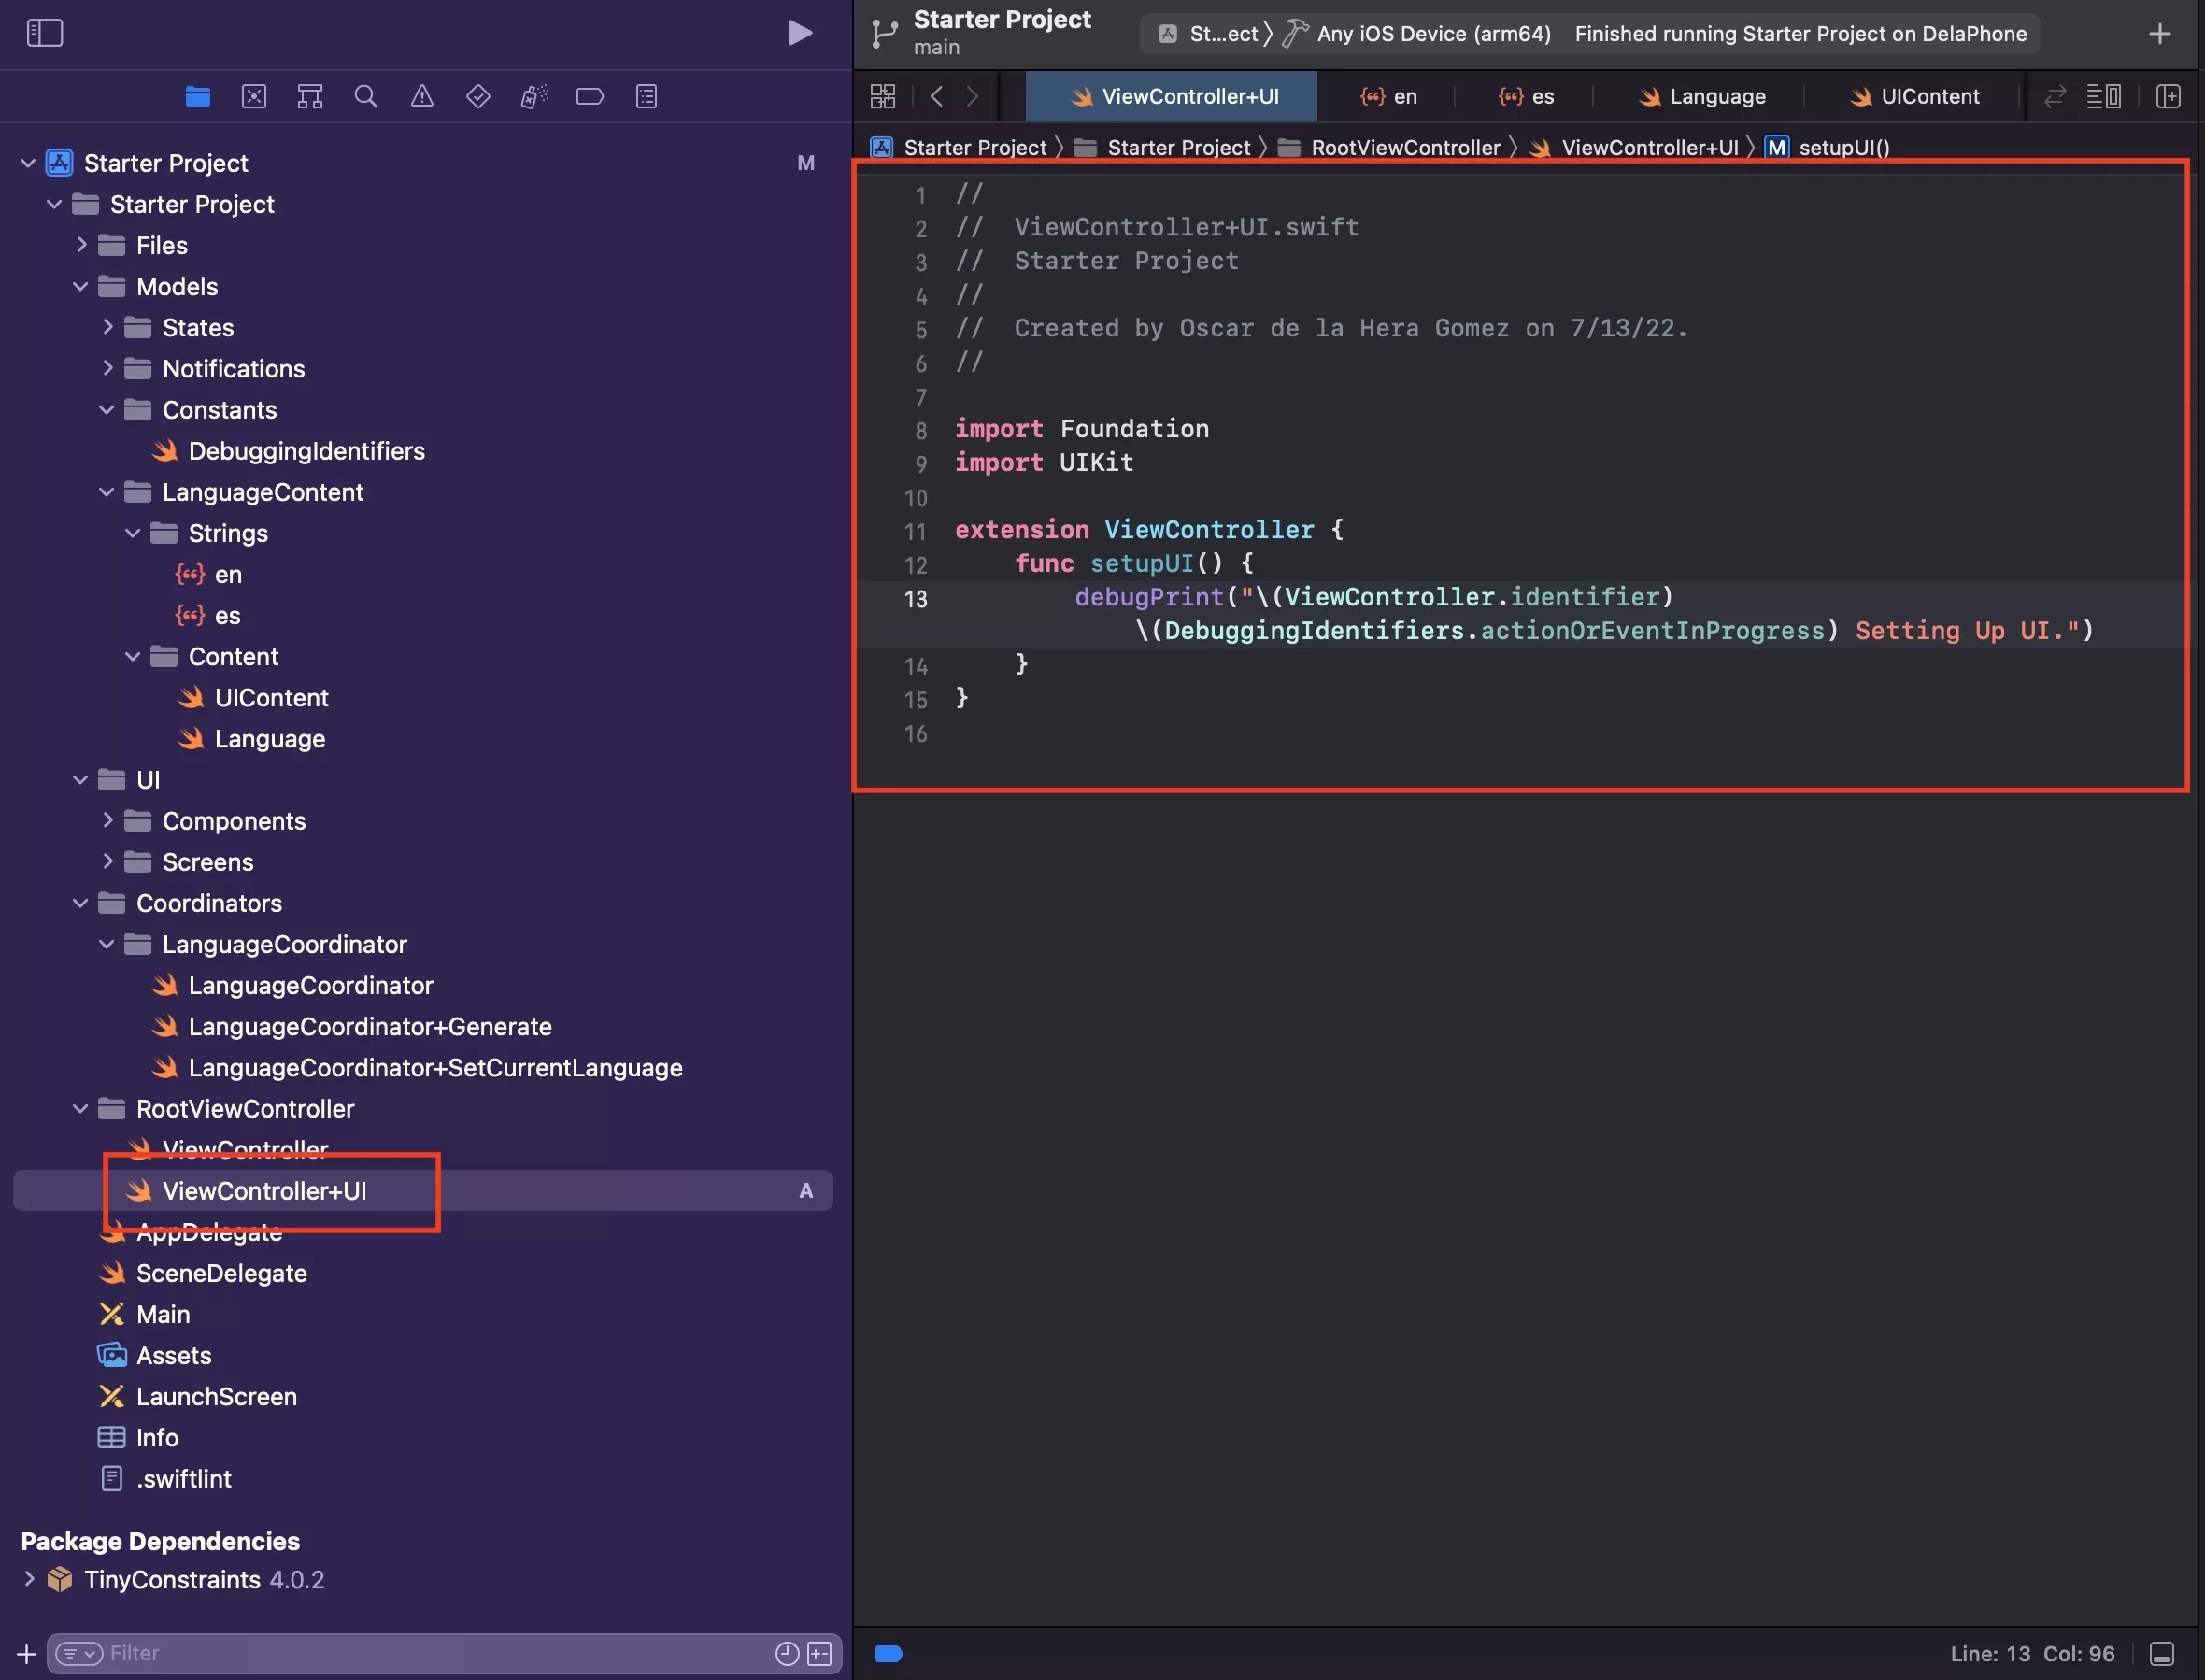 A screenshot showing you the code for the new ViewController+UI extension.